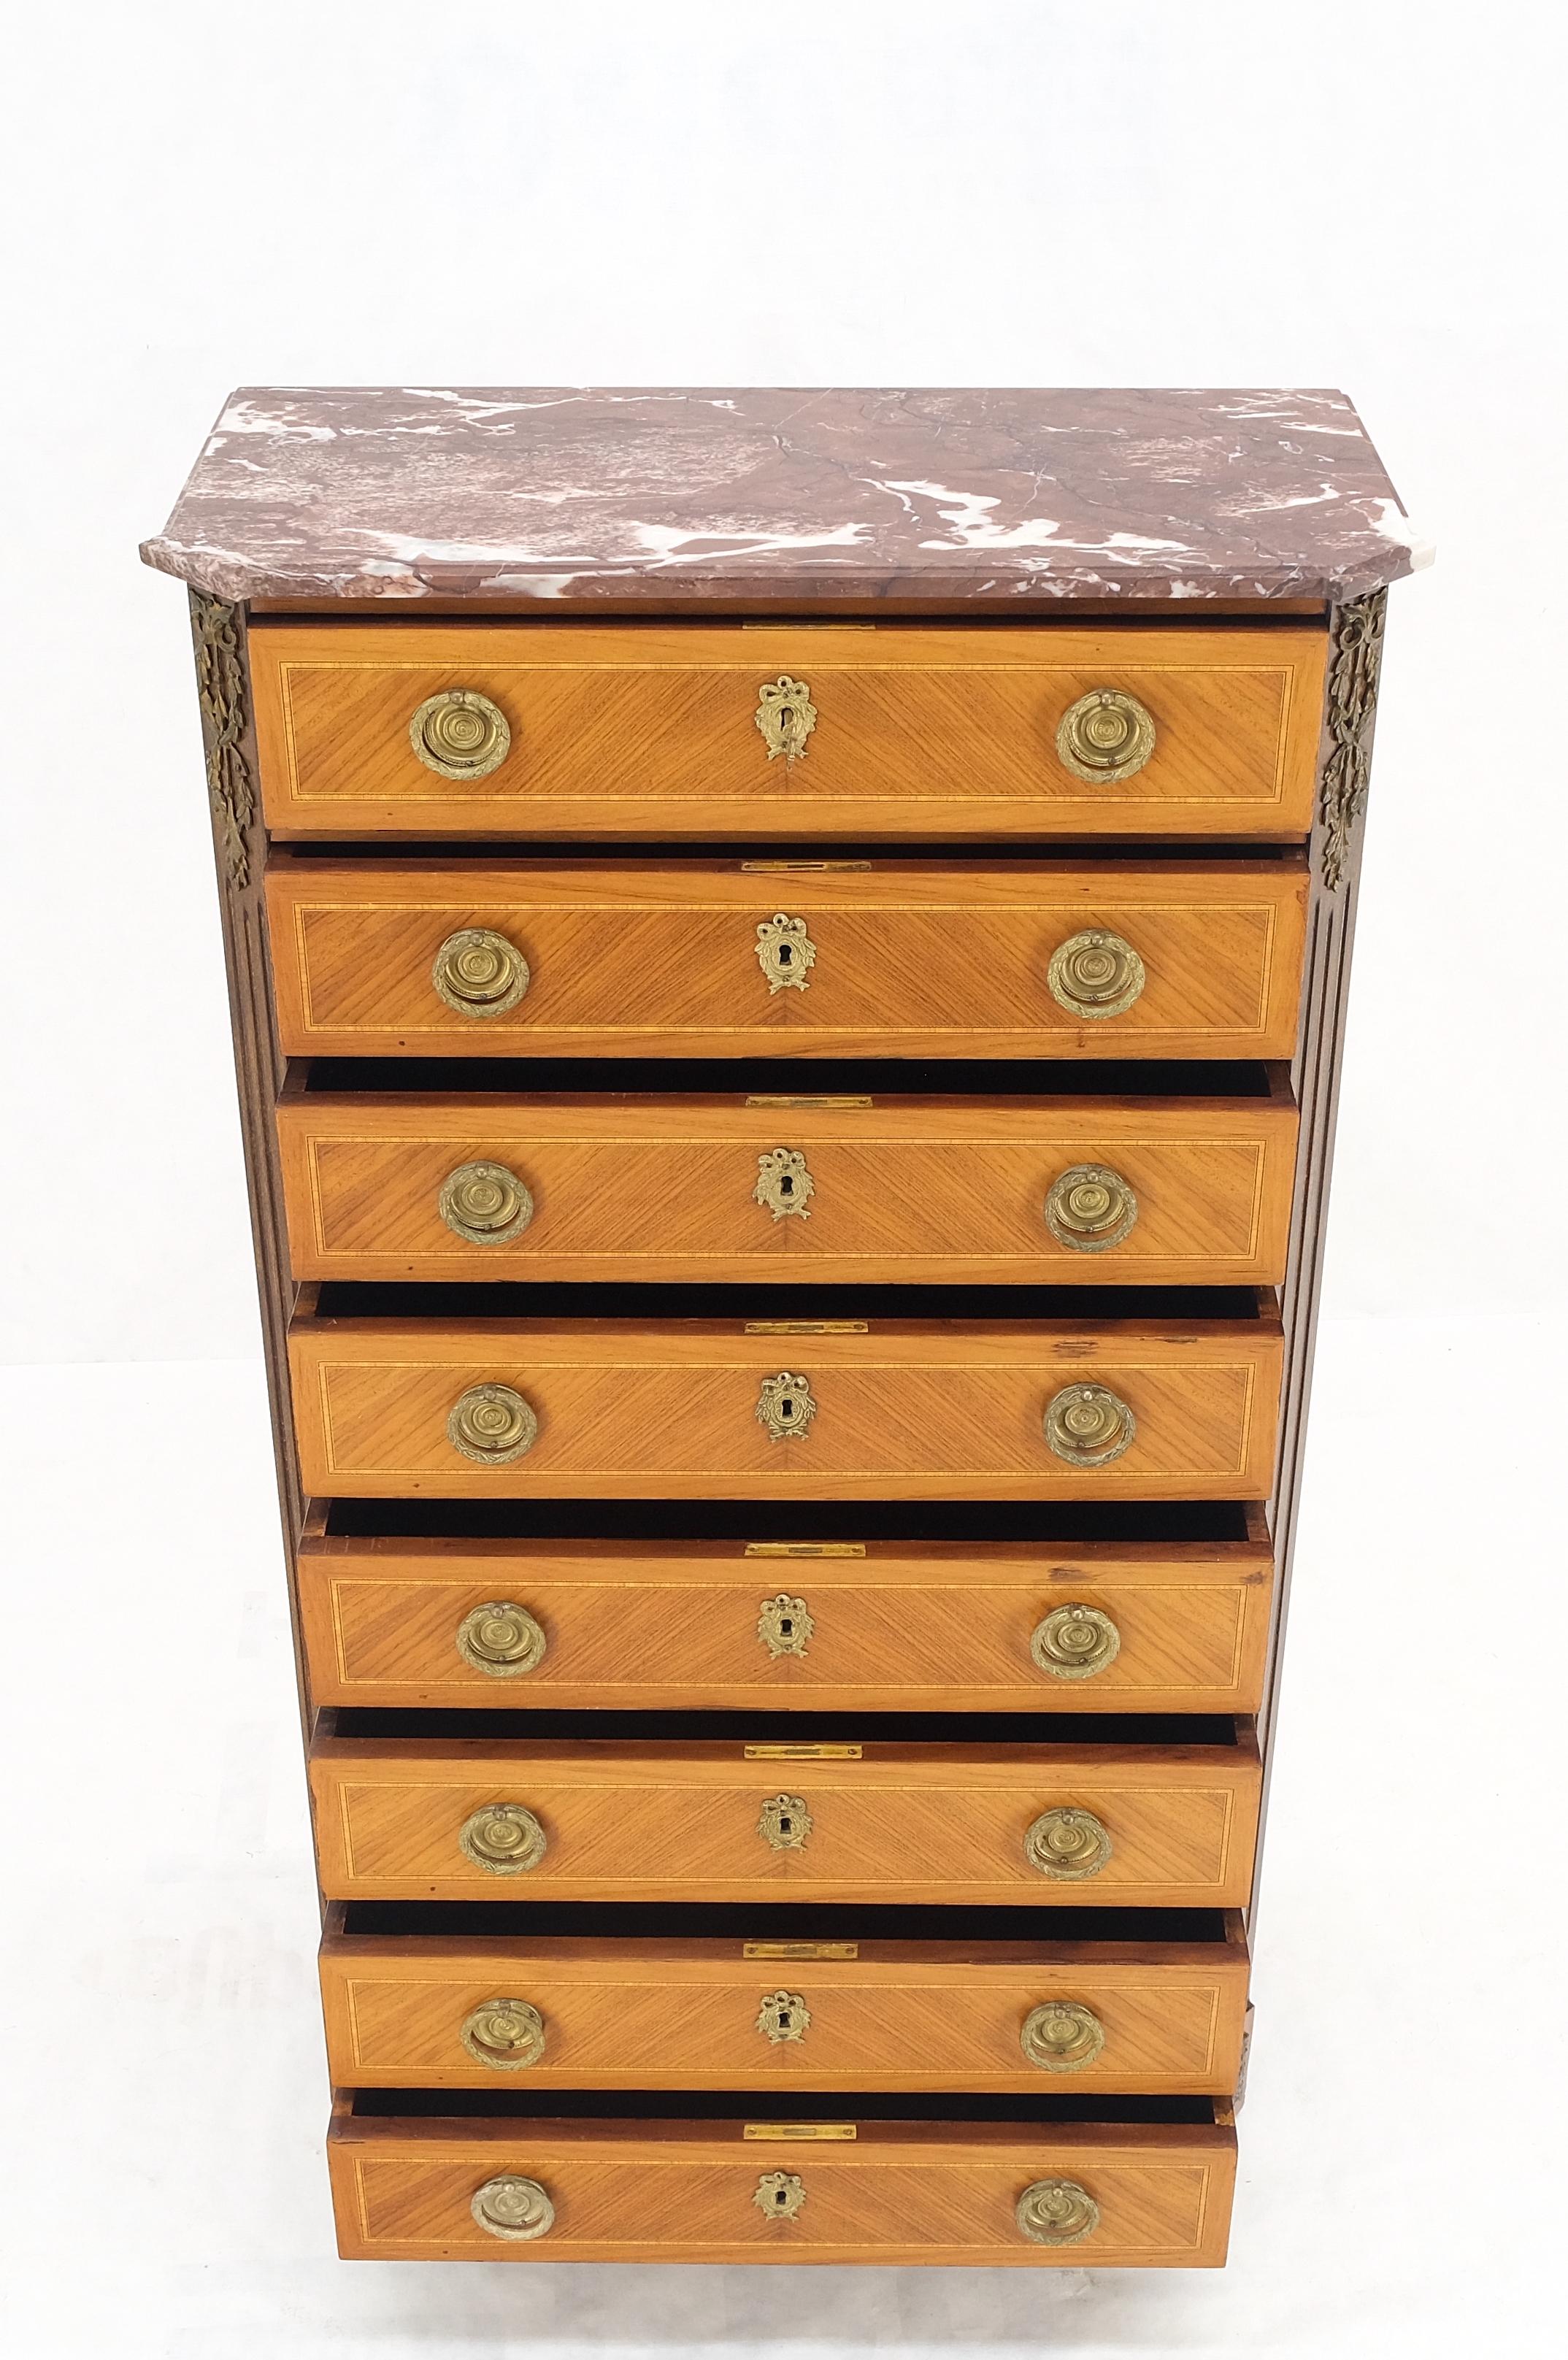 French Empire Marble Top Bronze Mounted Lingerie Chest Tall Narrow Dresser Mint! For Sale 8